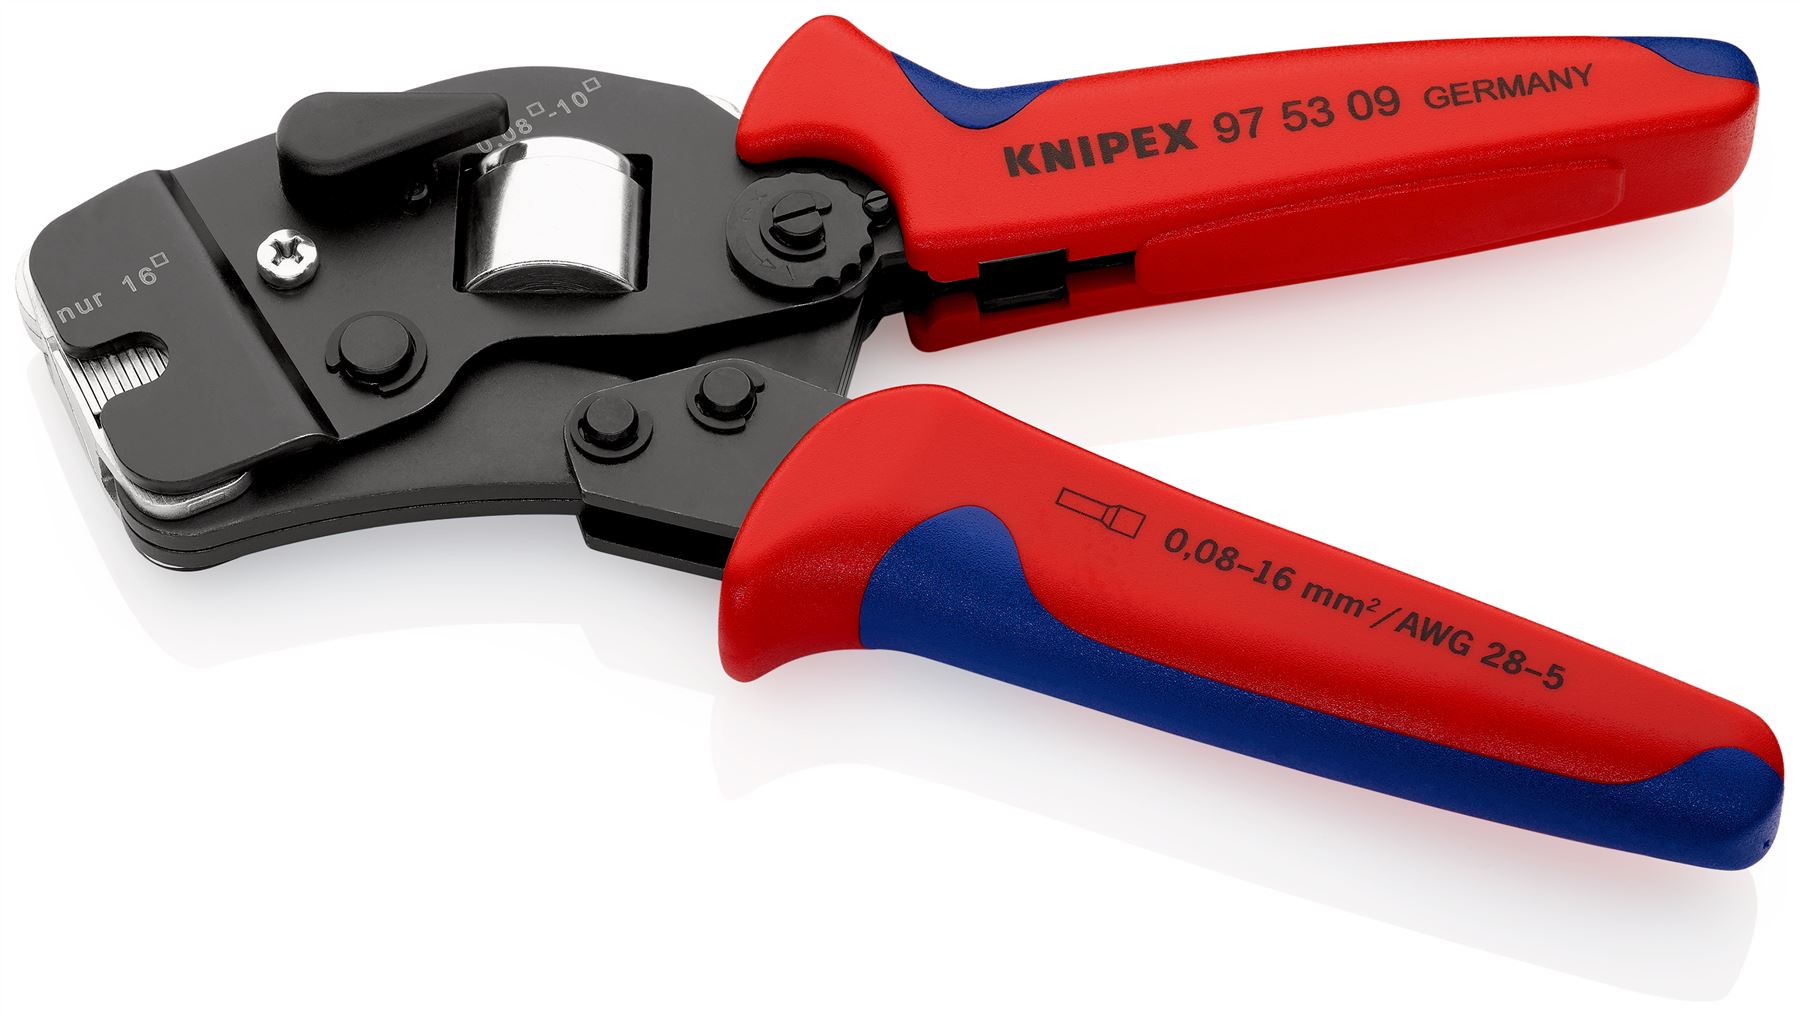 Knipex Crimping Pliers Self Adjusting for Wire Ferrules with Front Loading Multi Component Grips 97 53 09